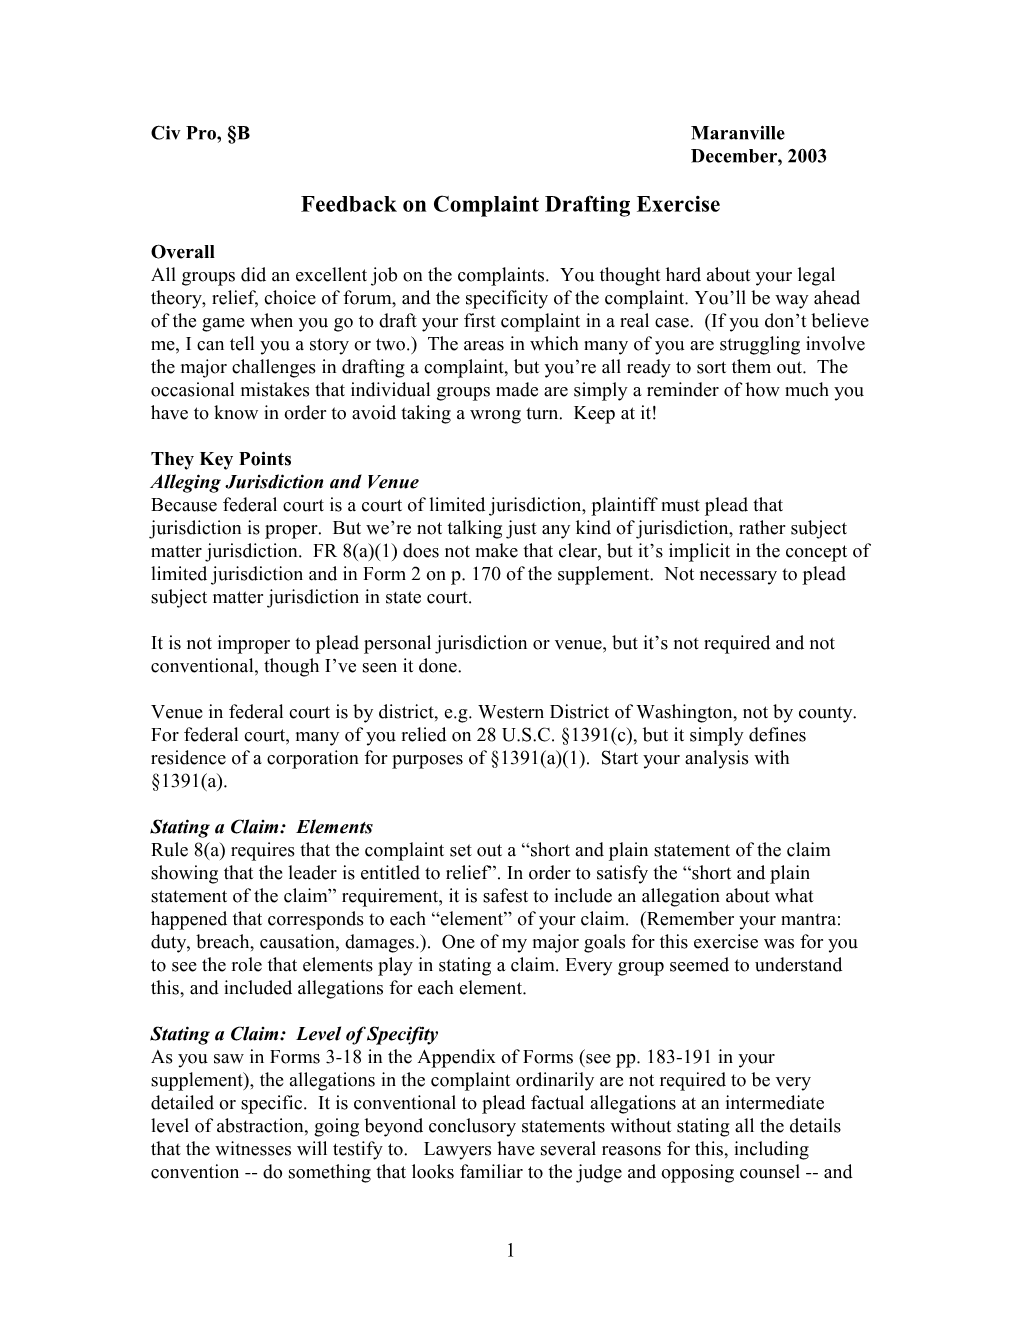 Feedback on Complaint Drafting Exercise